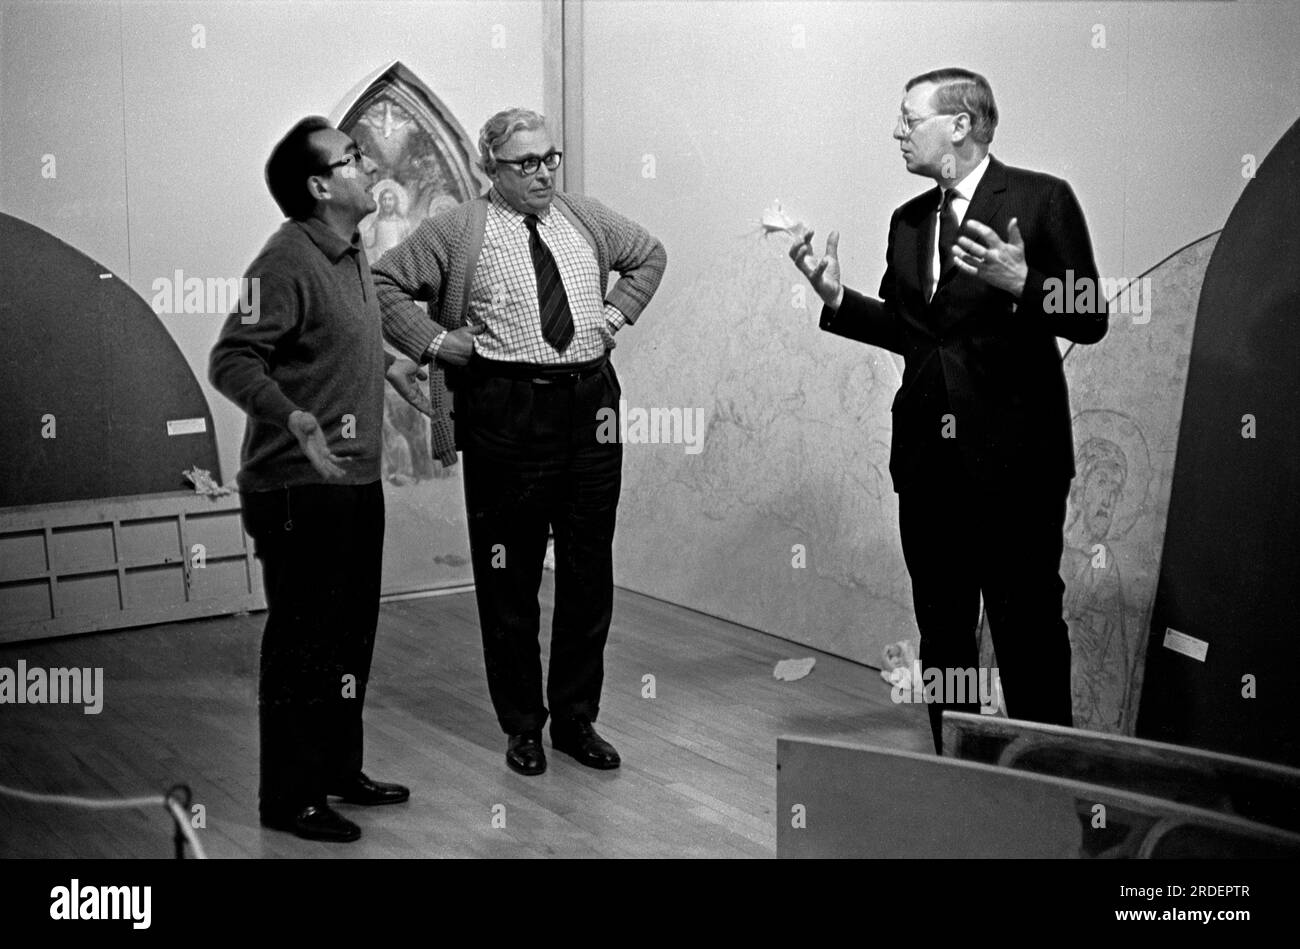 Hayward Gallery London. Hanging the Frescoes from Florence, an Arts Council Exhibition at the Hayward Gallery. Italian experts and Arts Council Hayward gallery wearing a suit discuss the installation.  London, England circa 1969 1960S UK HOMER SYKES Stock Photo